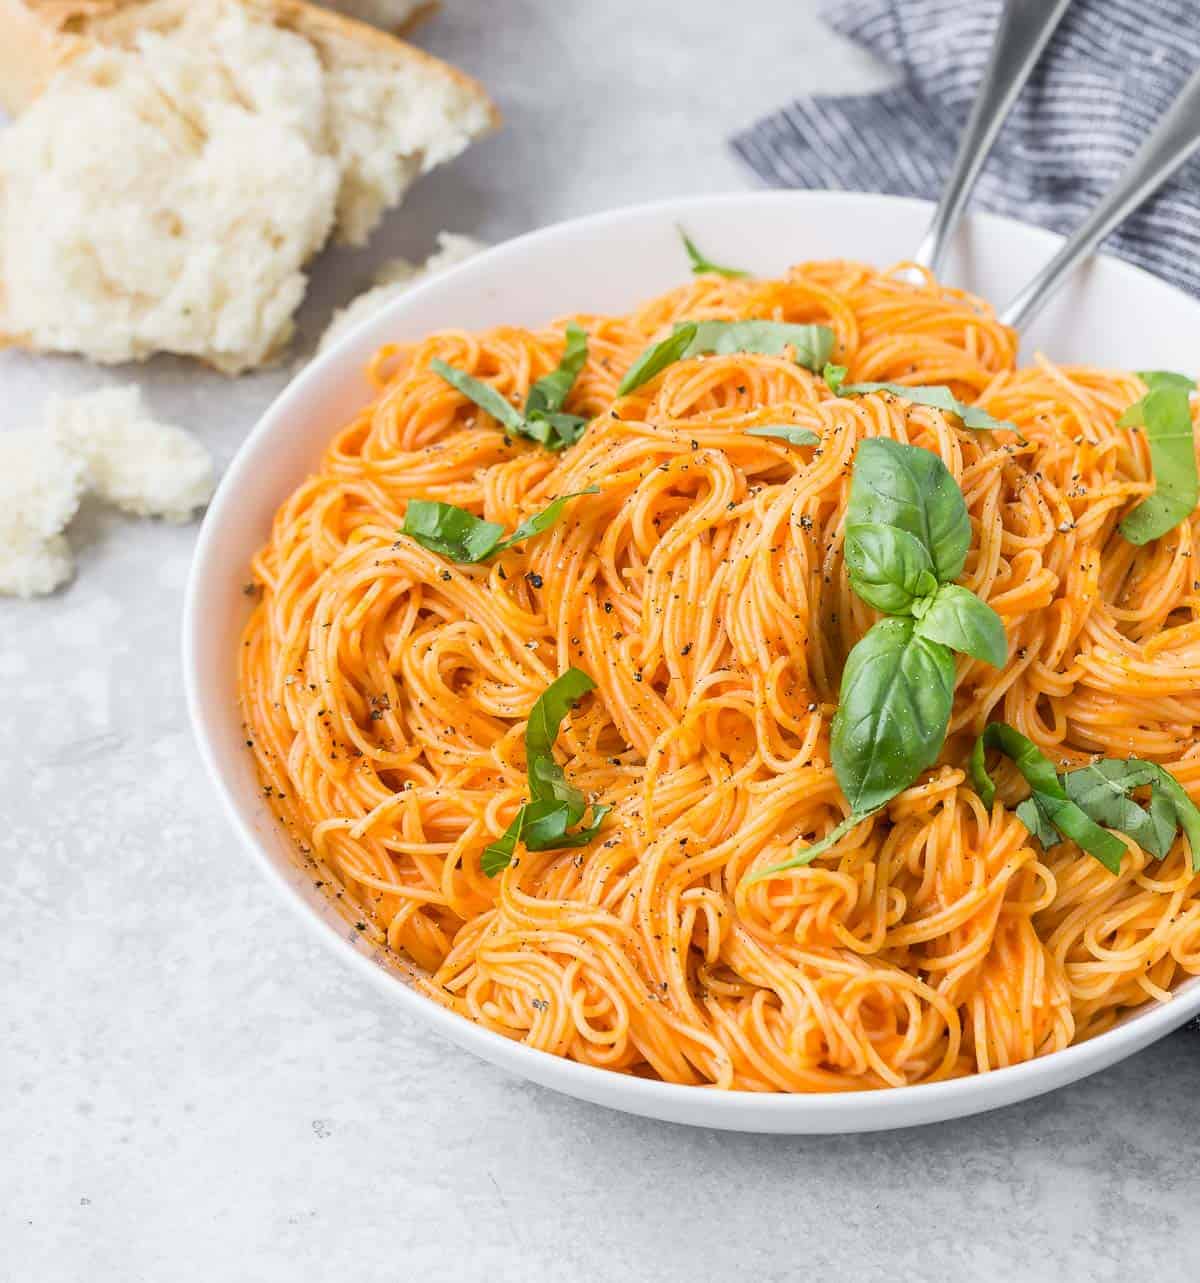 Simple pasta dish made with roasted red peppers and angel hair pasta, in a white bowl, with bread in the background.